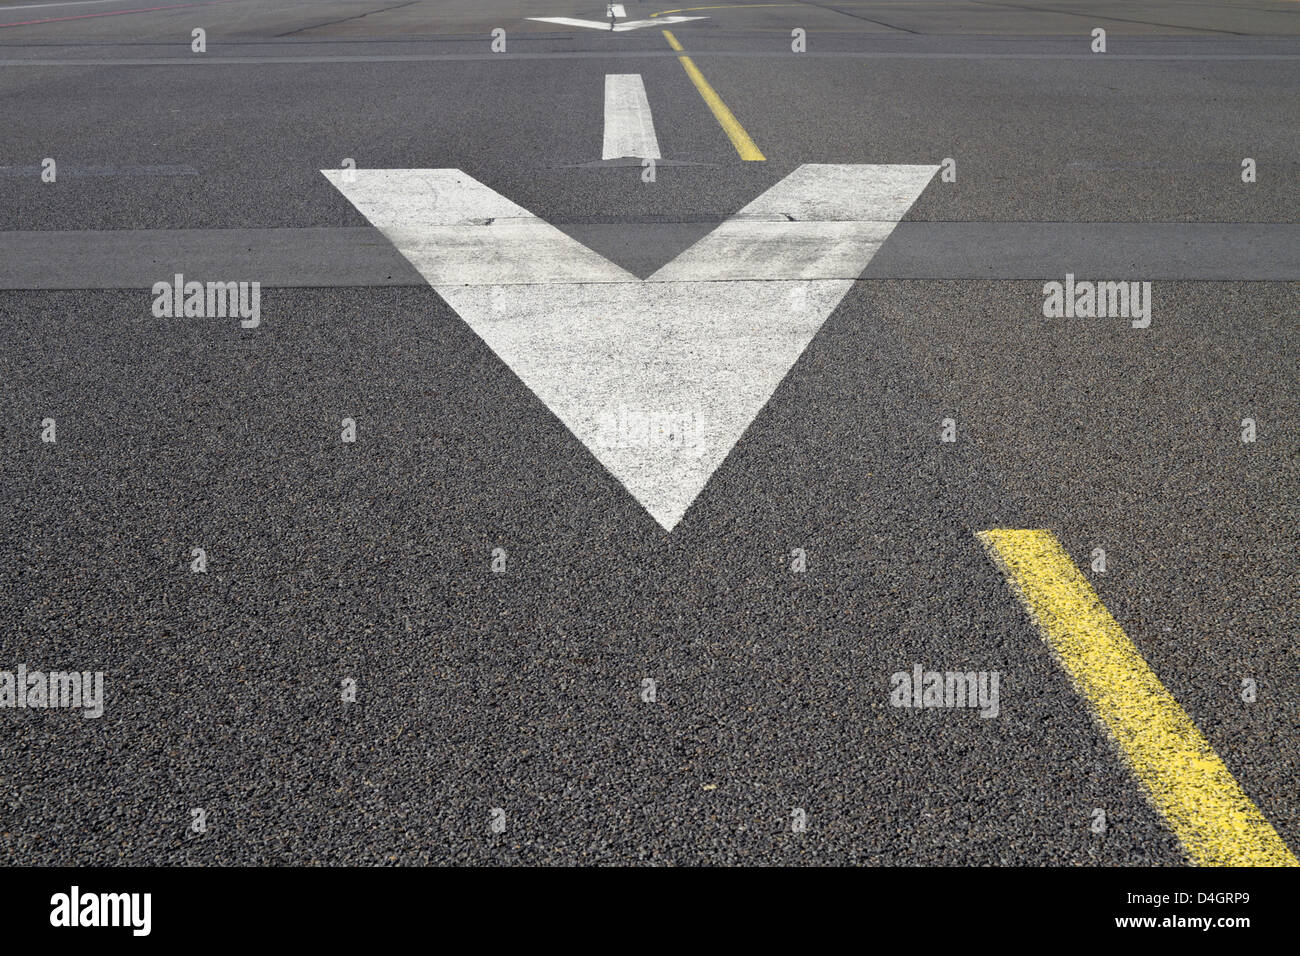 Arrows on the surface of a runway Stock Photo